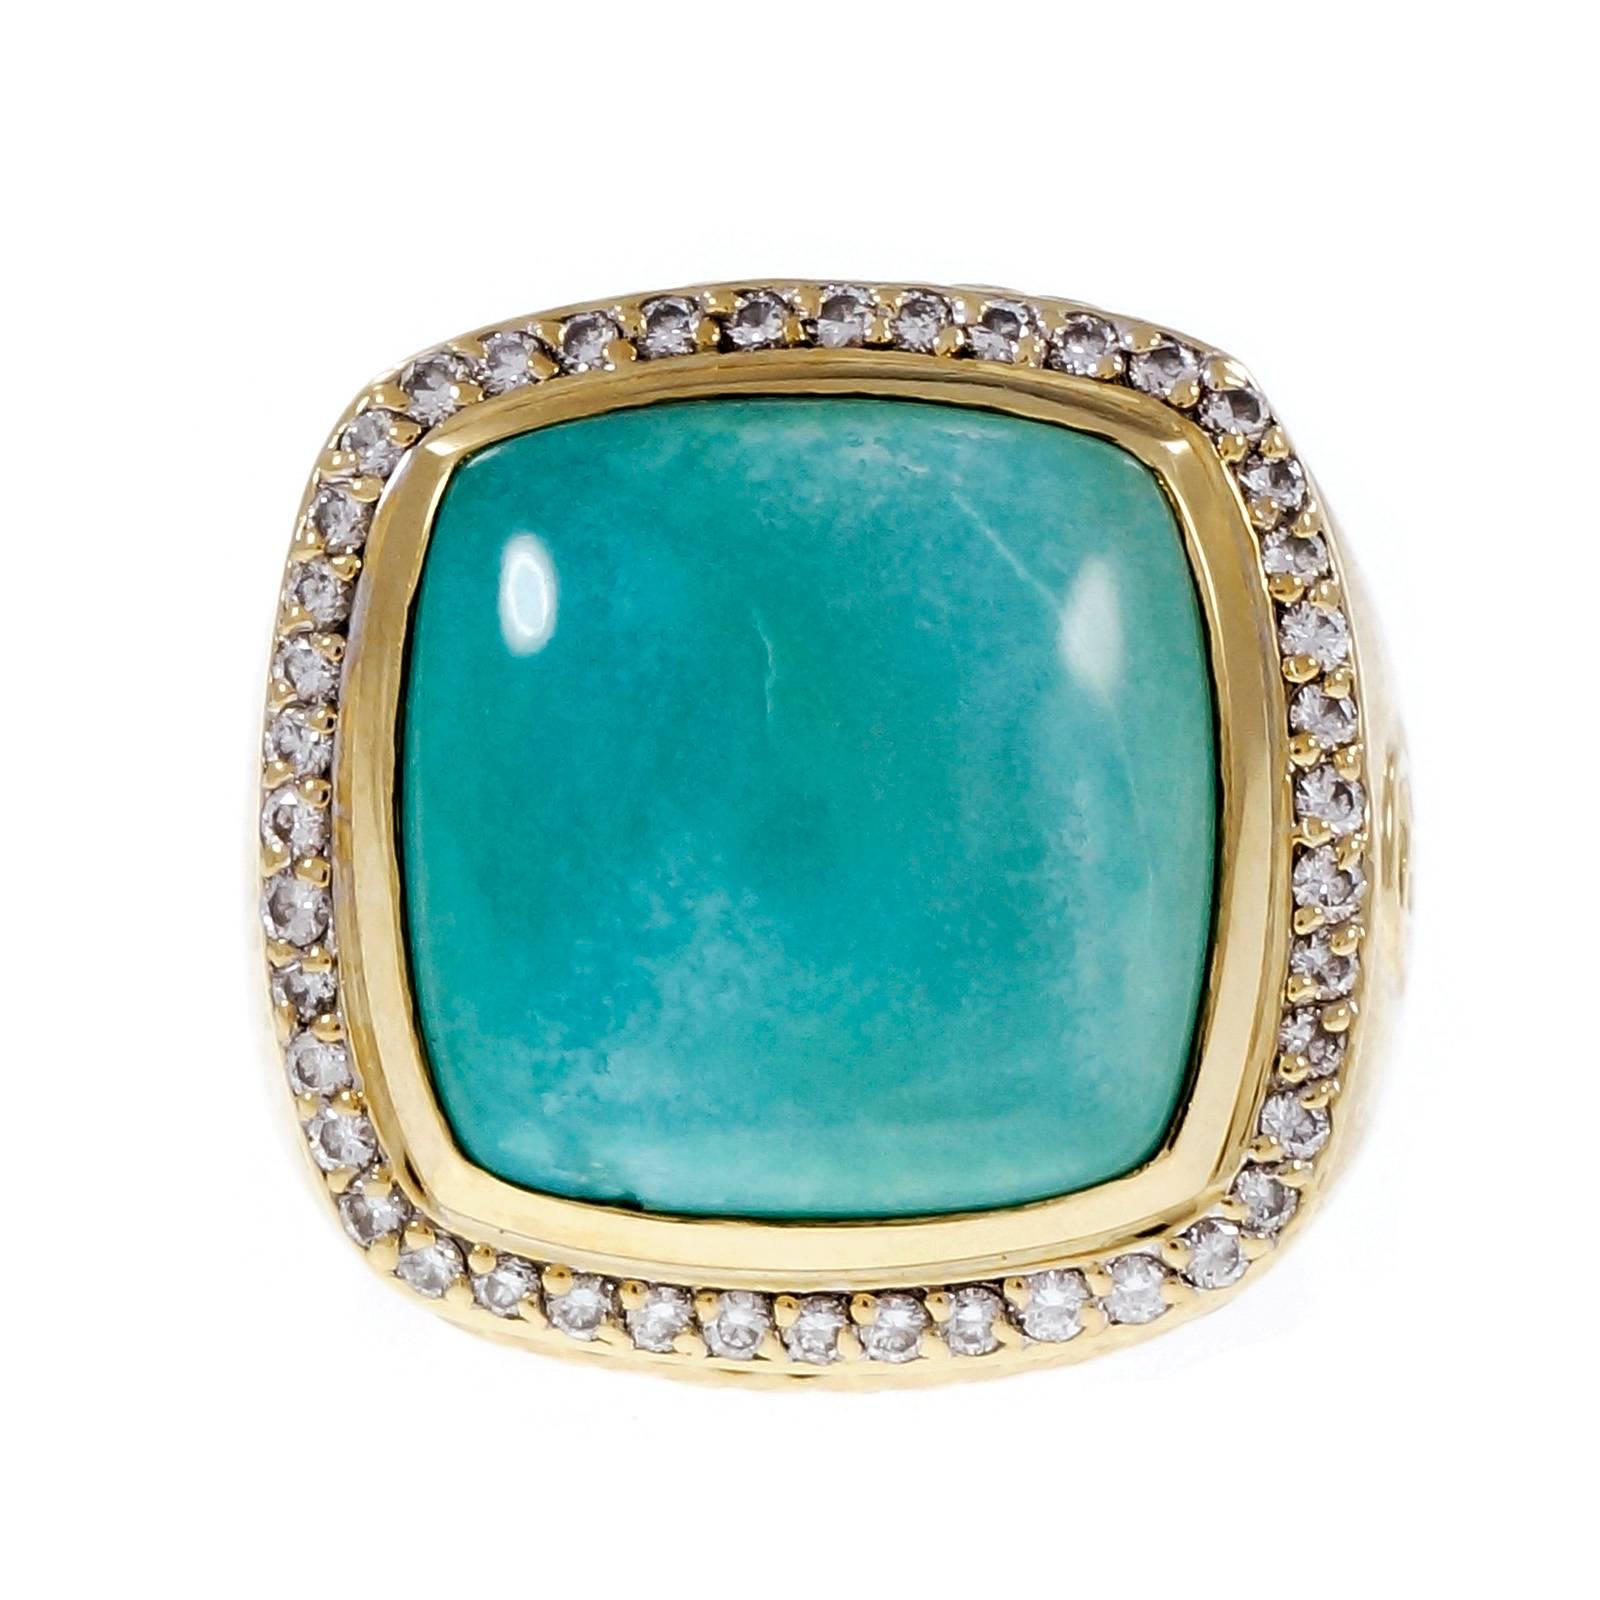 David Yurman solid 18k yellow gold Albion ring with a rim of bright white full cut diamonds surrounding a natural Turquoise.

44 round full cut diamonds, approx. total weight .30cts, H, VS – SI
1 cushion cabochon blue Turquoise 15 x 15mm
18k yellow